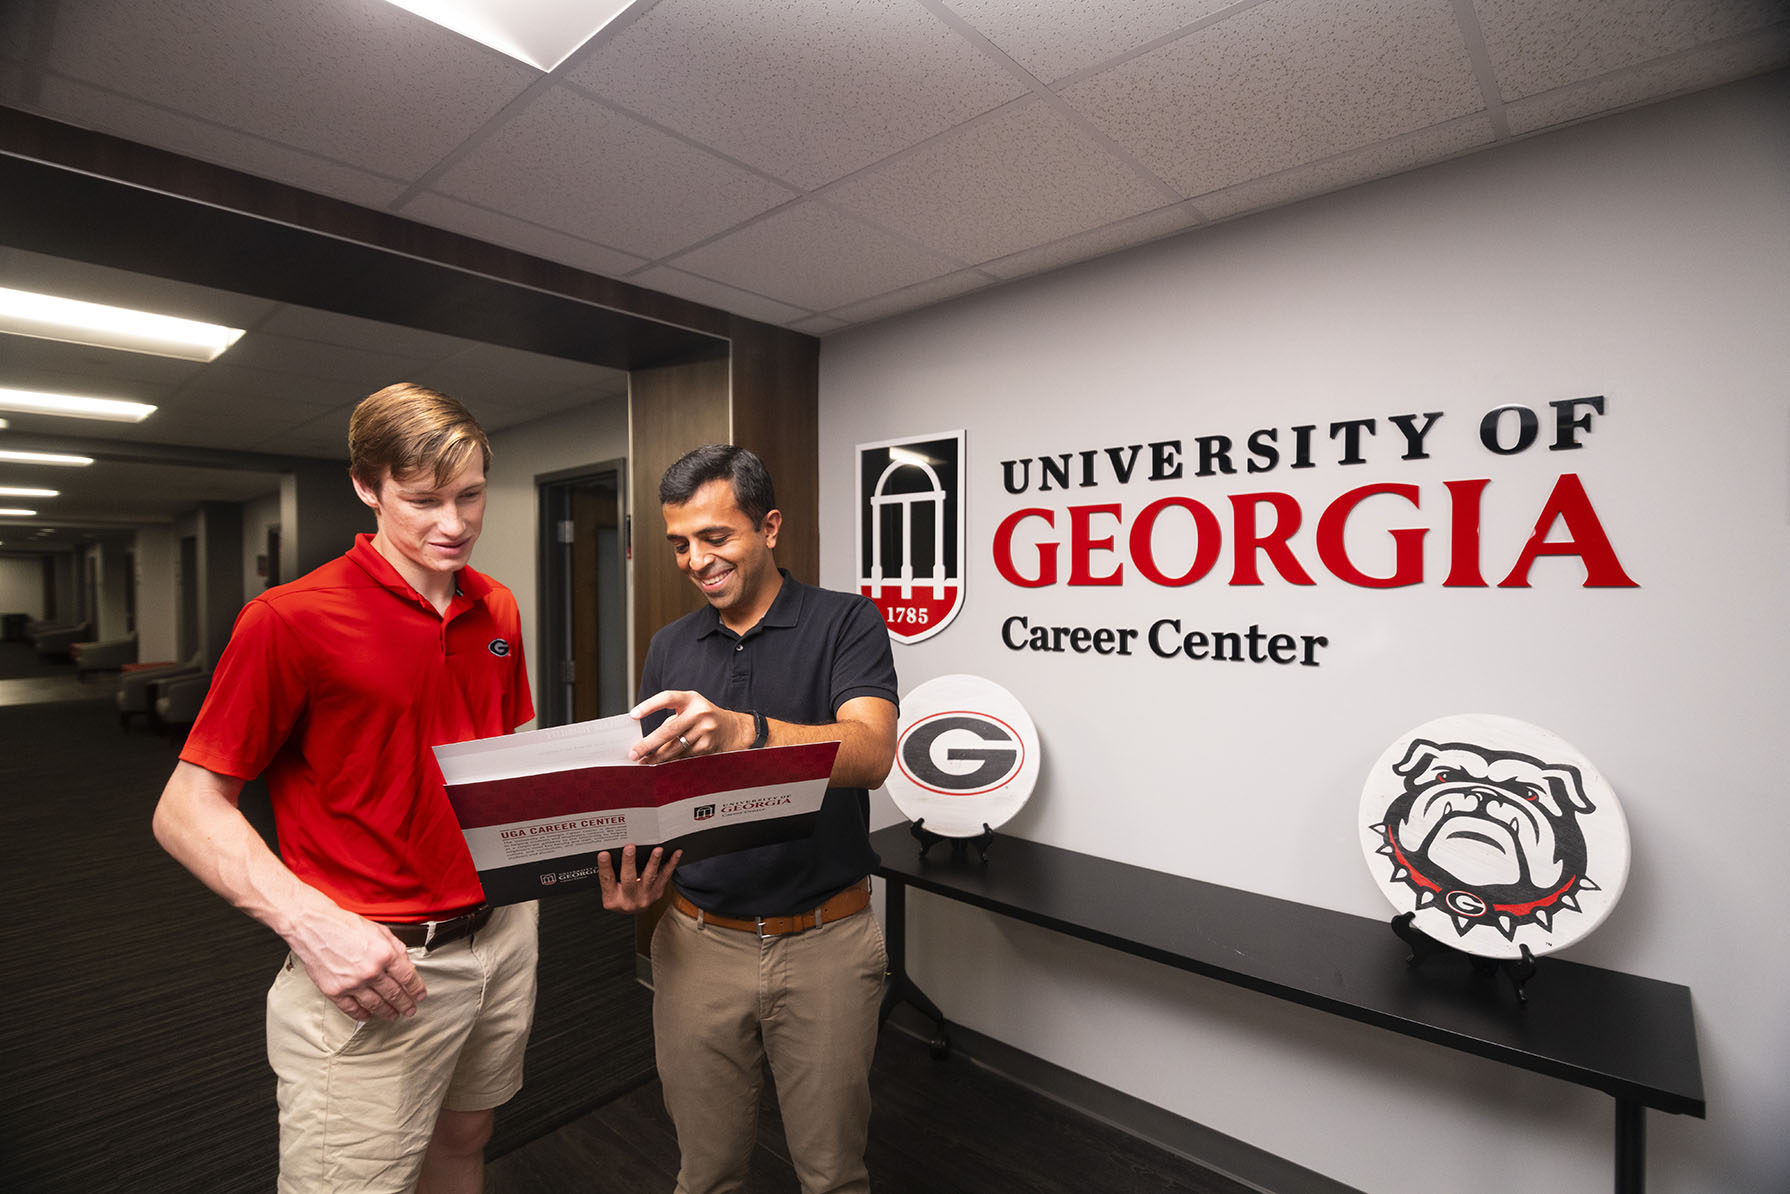 UGA Career Center staff sharing information with a student